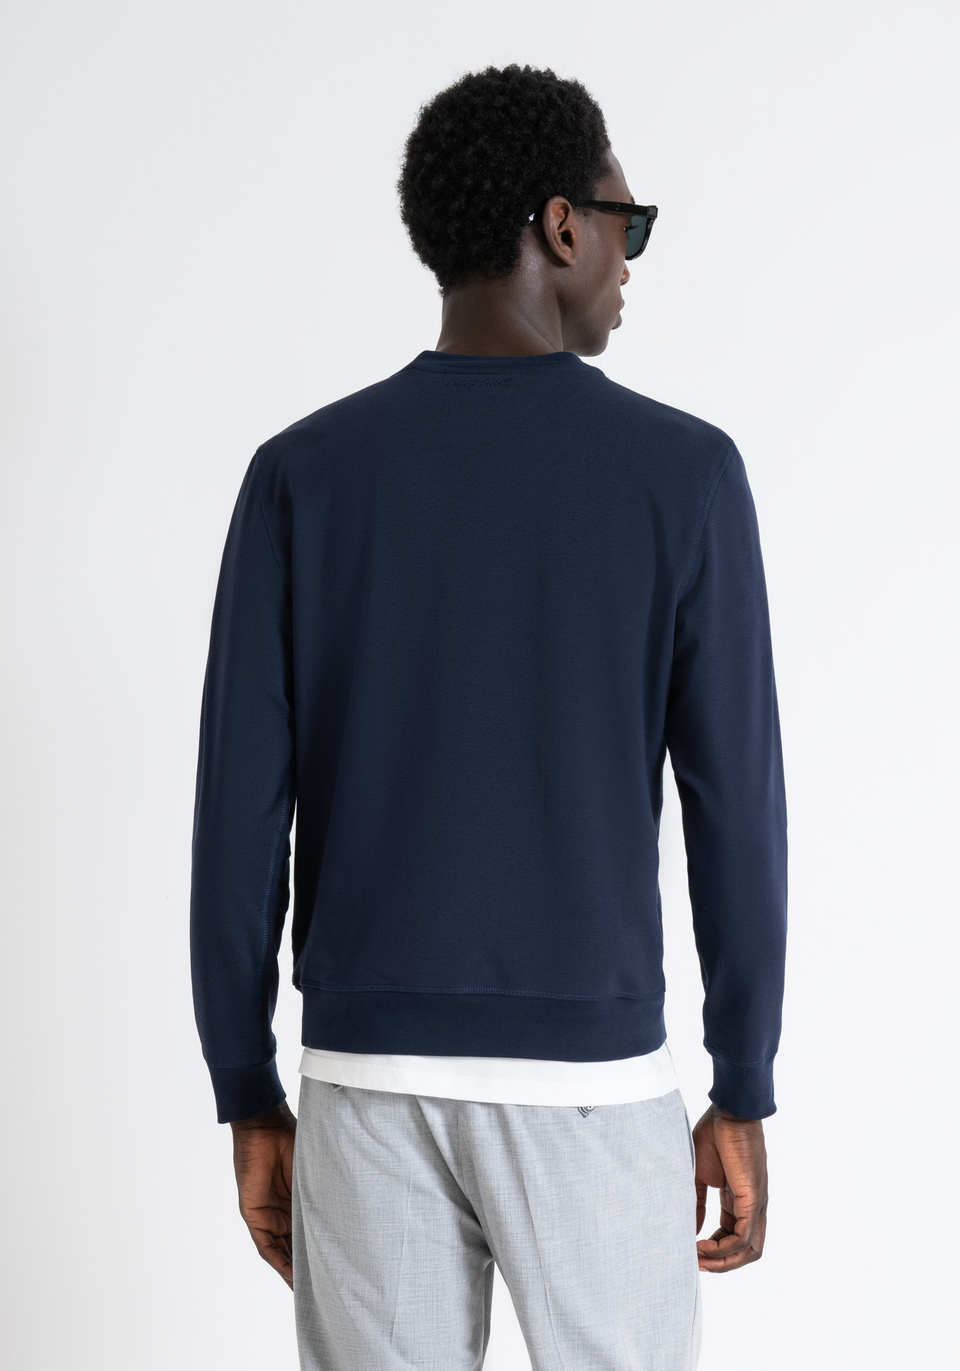 REGULAR FIT SWEATSHIRT IN SUSTAINABLE COTTON-POLYESTER BLEND WITH MATTE PLASTIC AND FLOCK PRINT - Antony Morato Online Shop